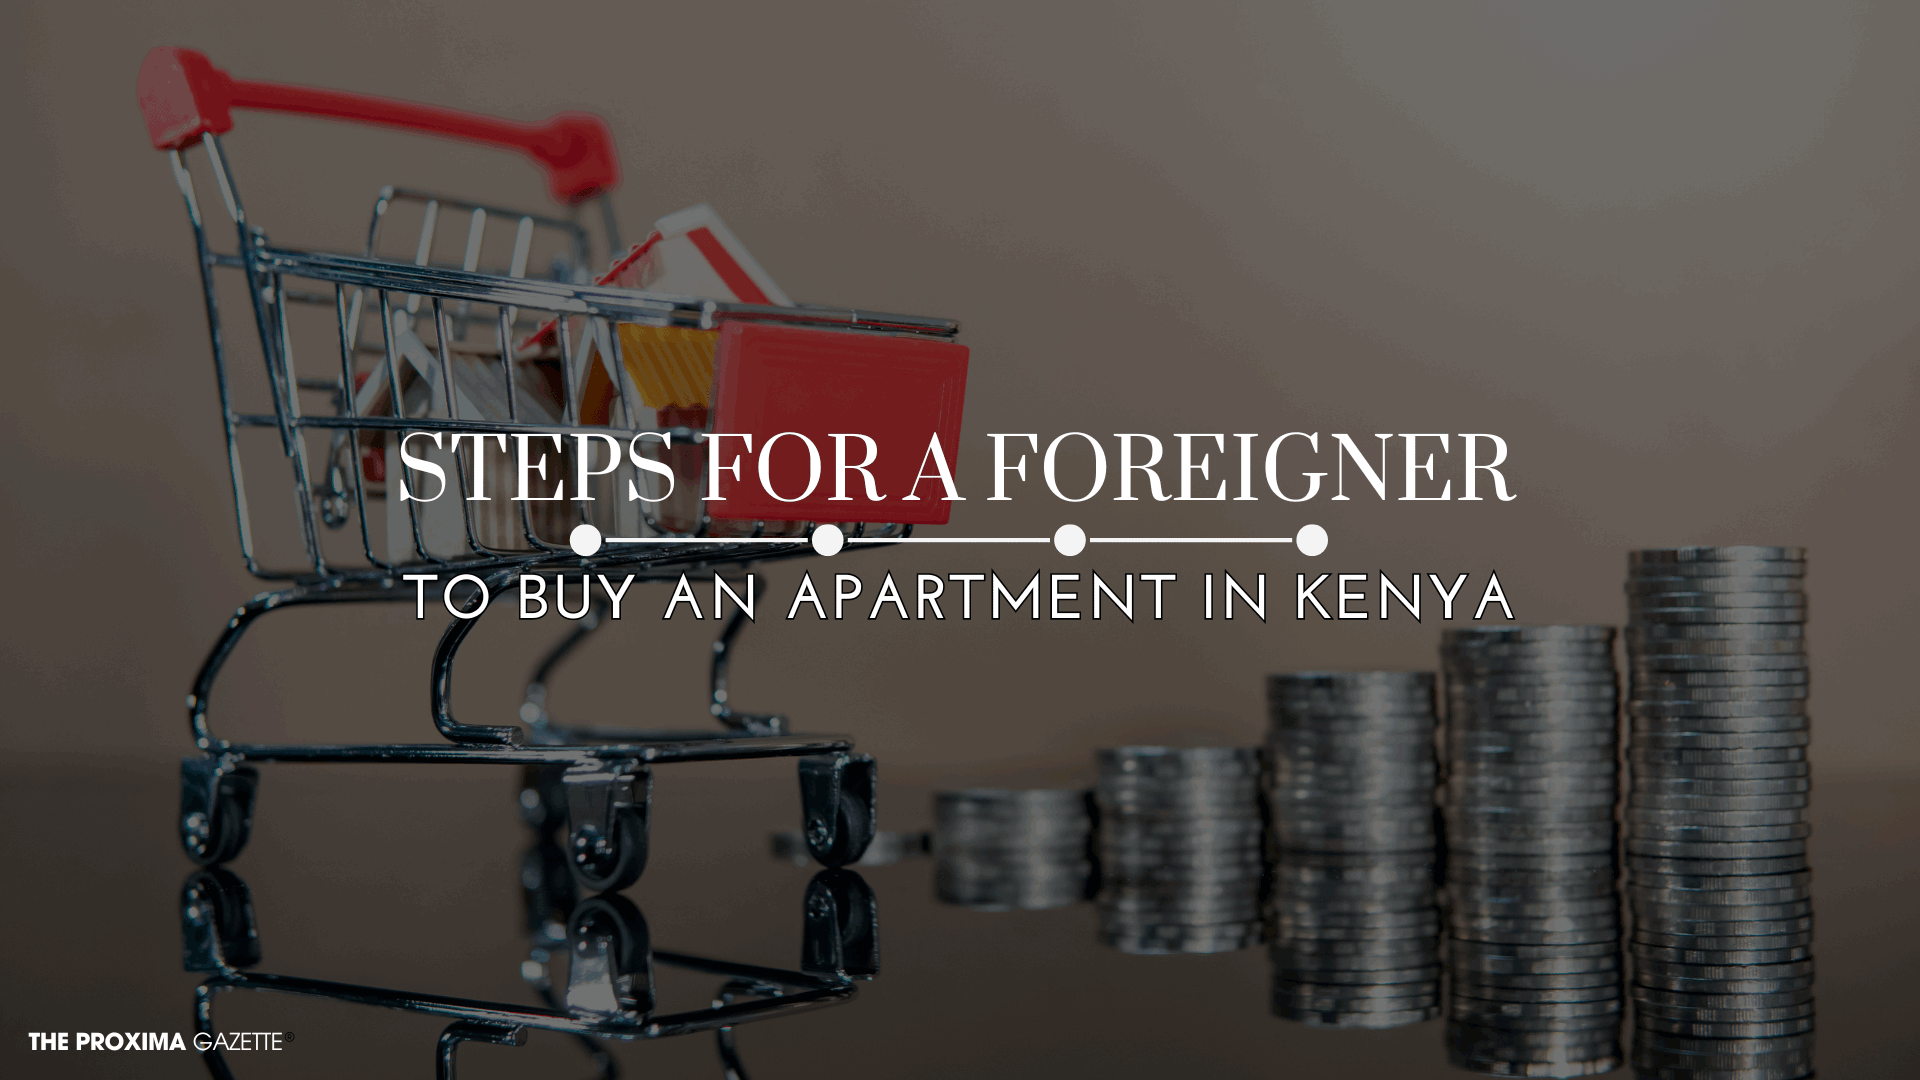 STEPS FOR A FOREIGNER TO BUY AN APARTMENT IN KENYA